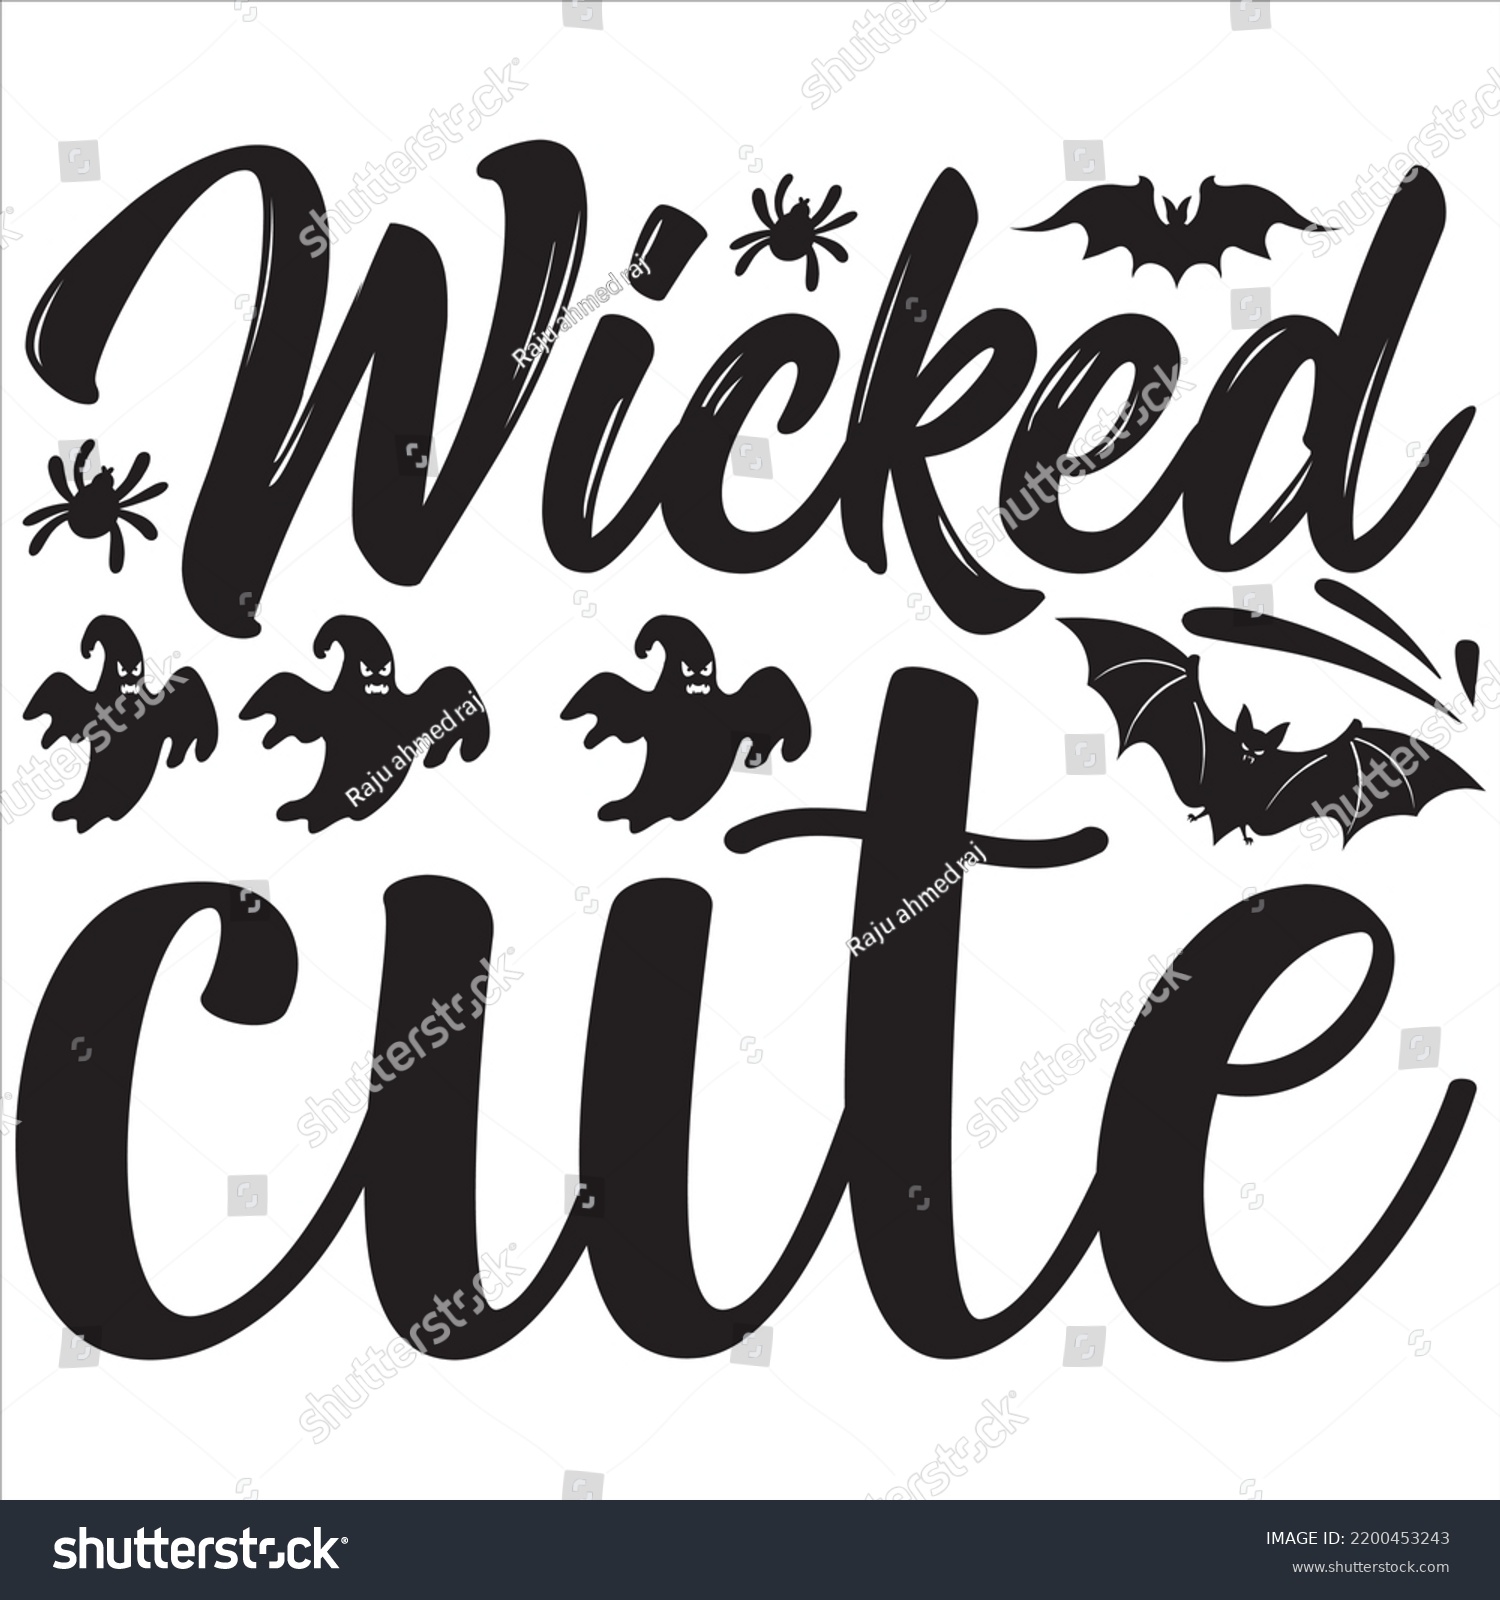 SVG of Wicked cute, Halloween svg t-shirt design and vector file. svg